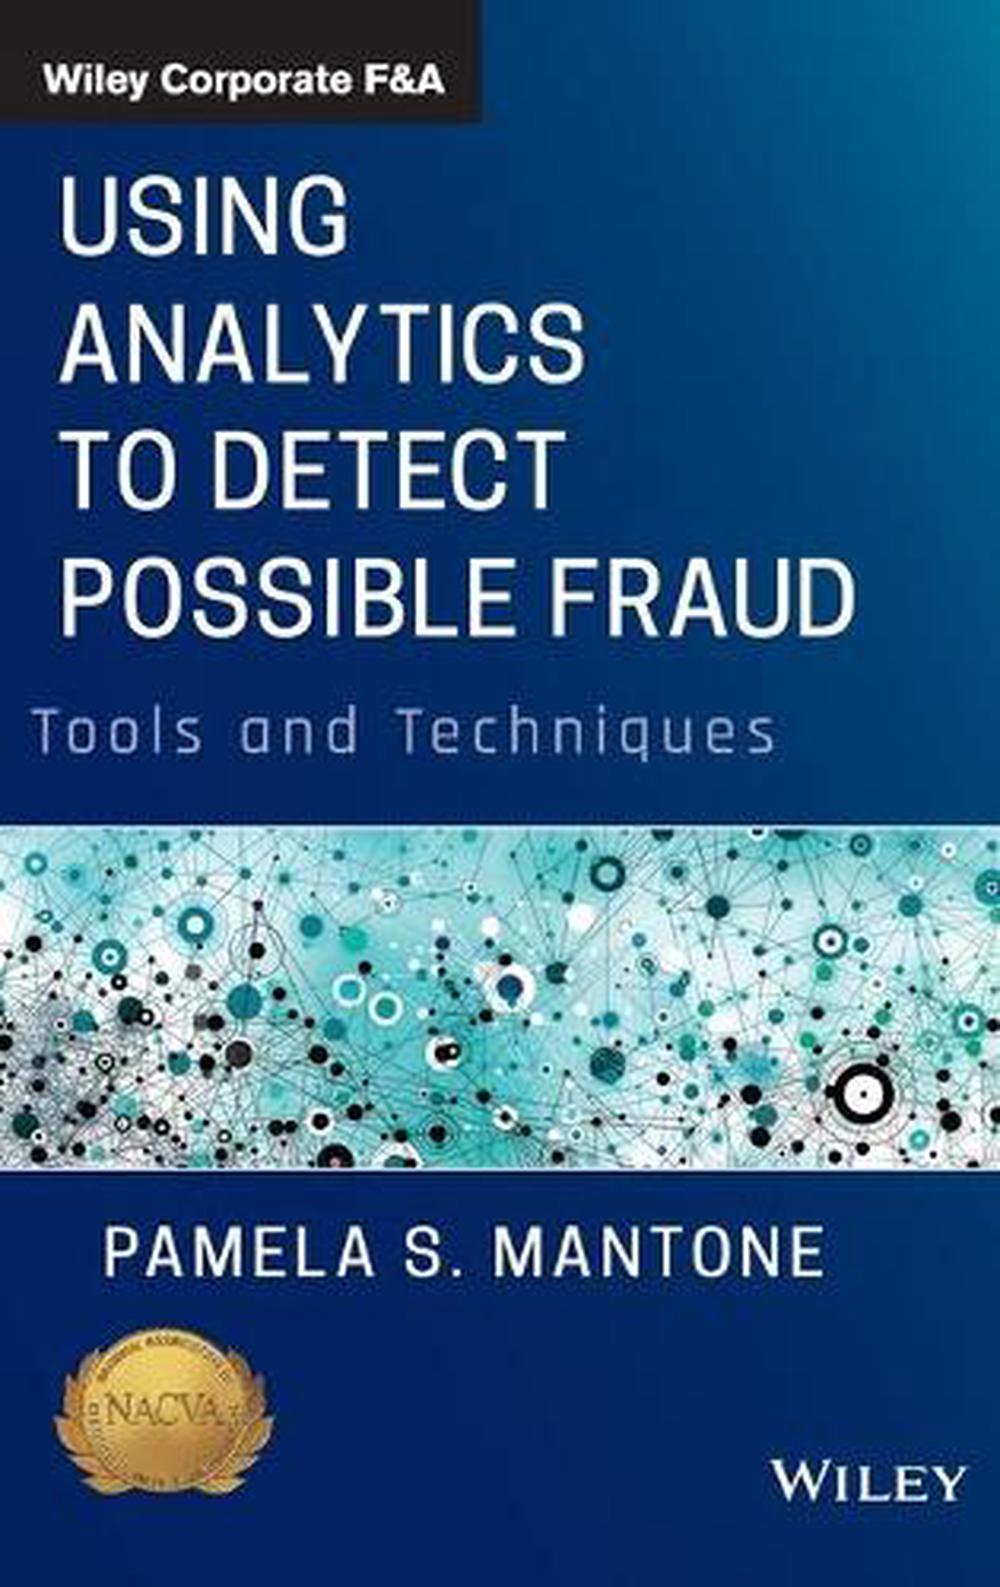 Using Analytics to Detect Possible Fraud Tools and Techniques by P.S